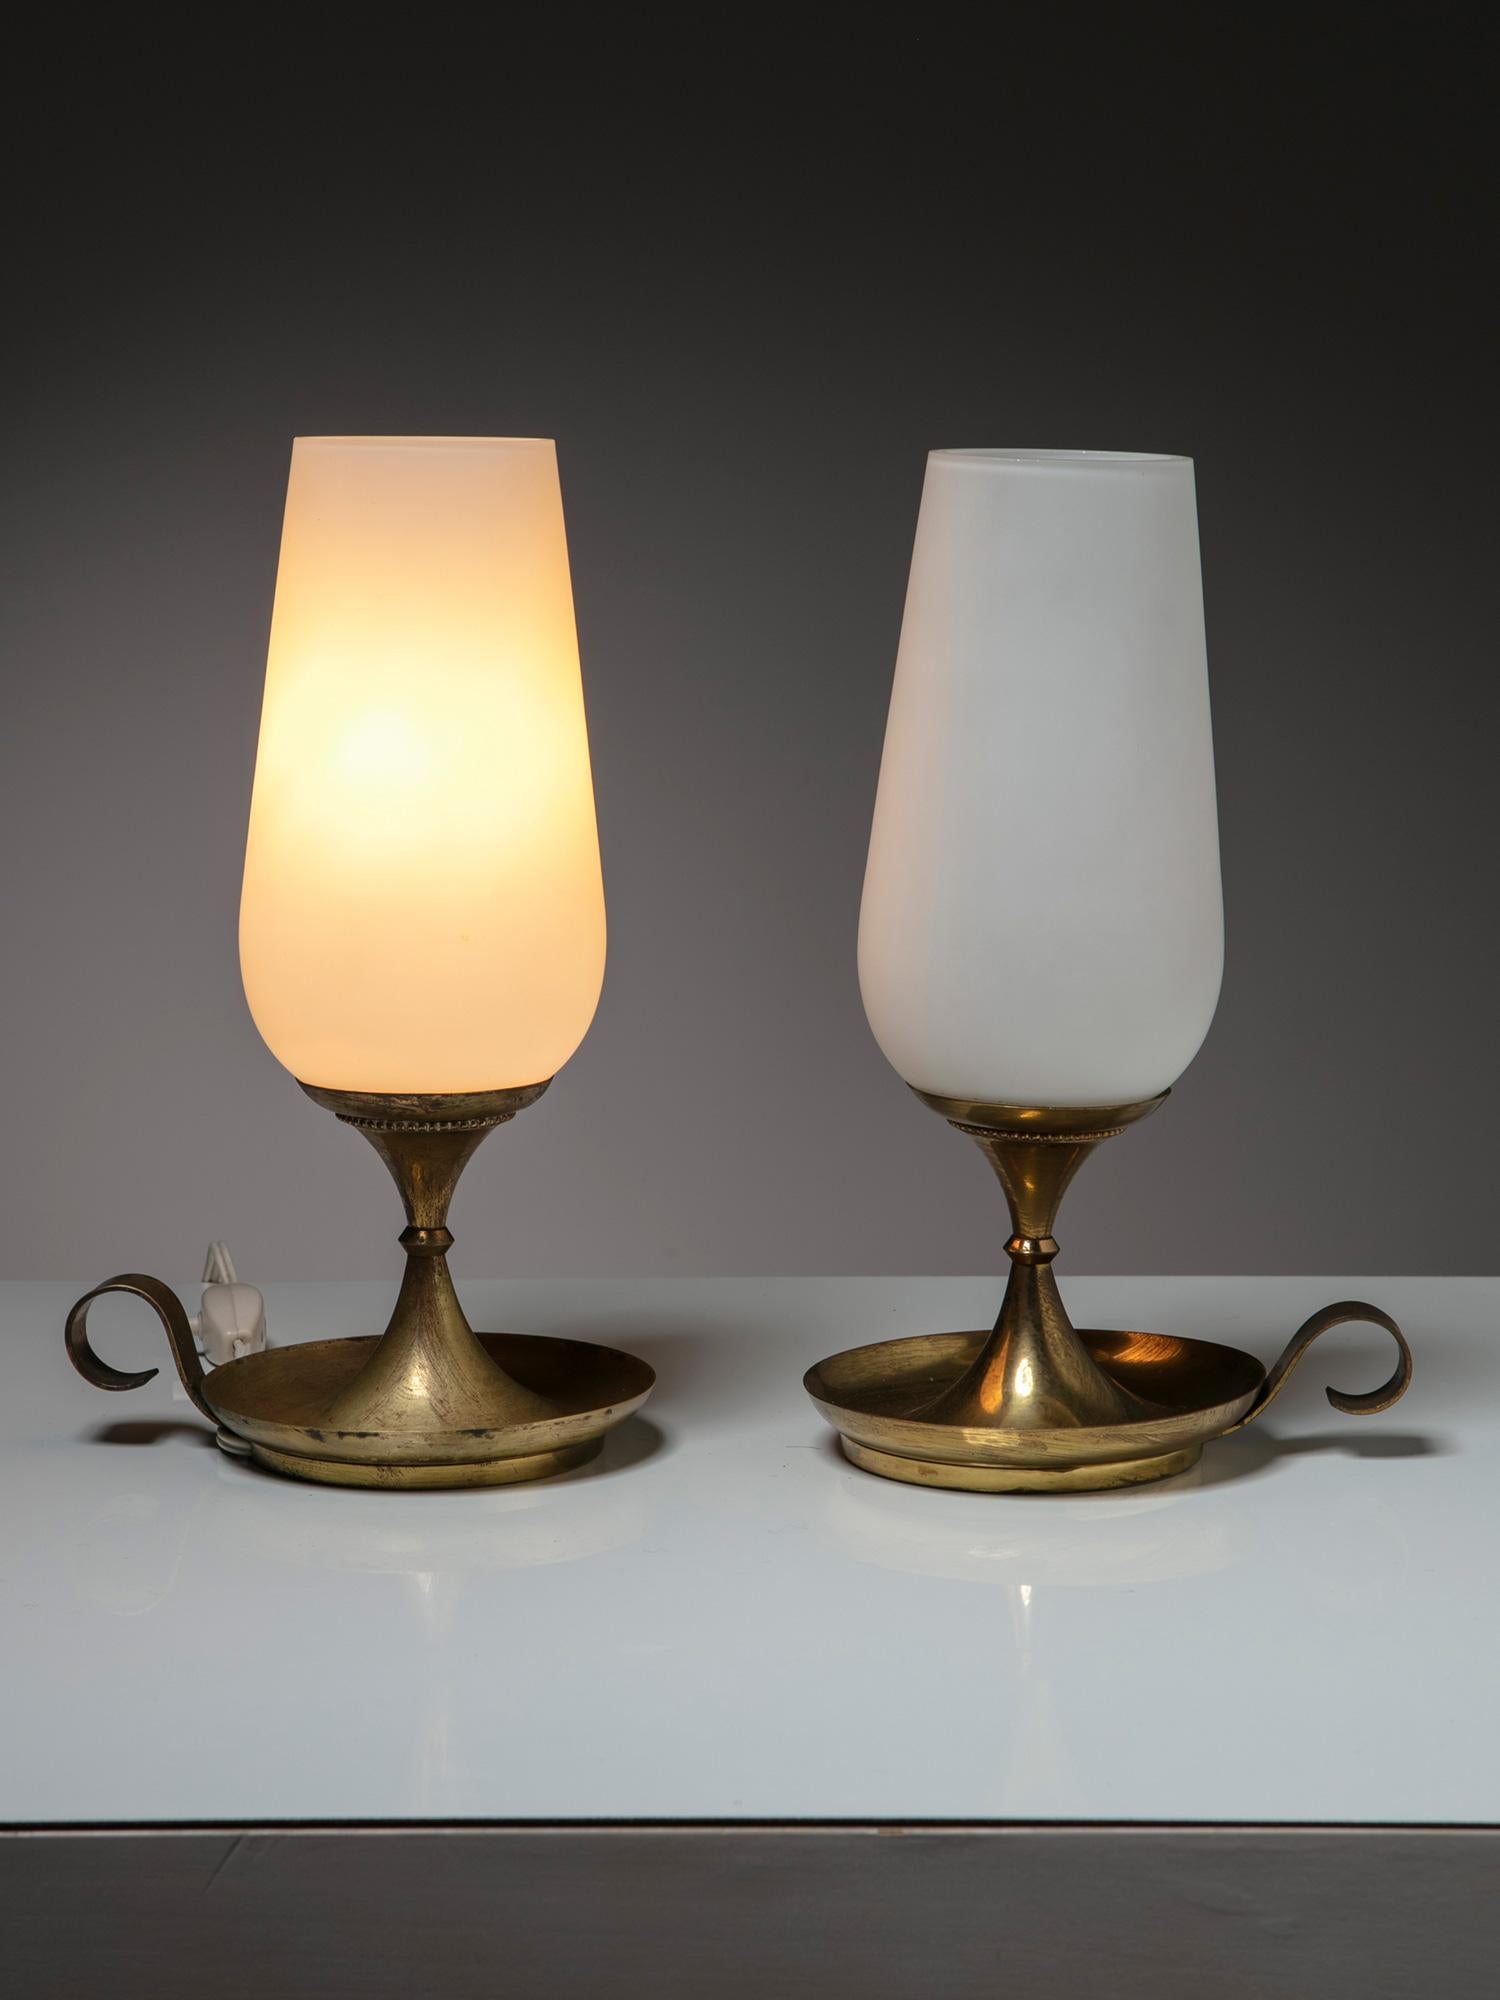 Scarce pair of Bedside Table lamps manufactured by Stilnovo.
Double layered glass shade and thick brass detailed base.